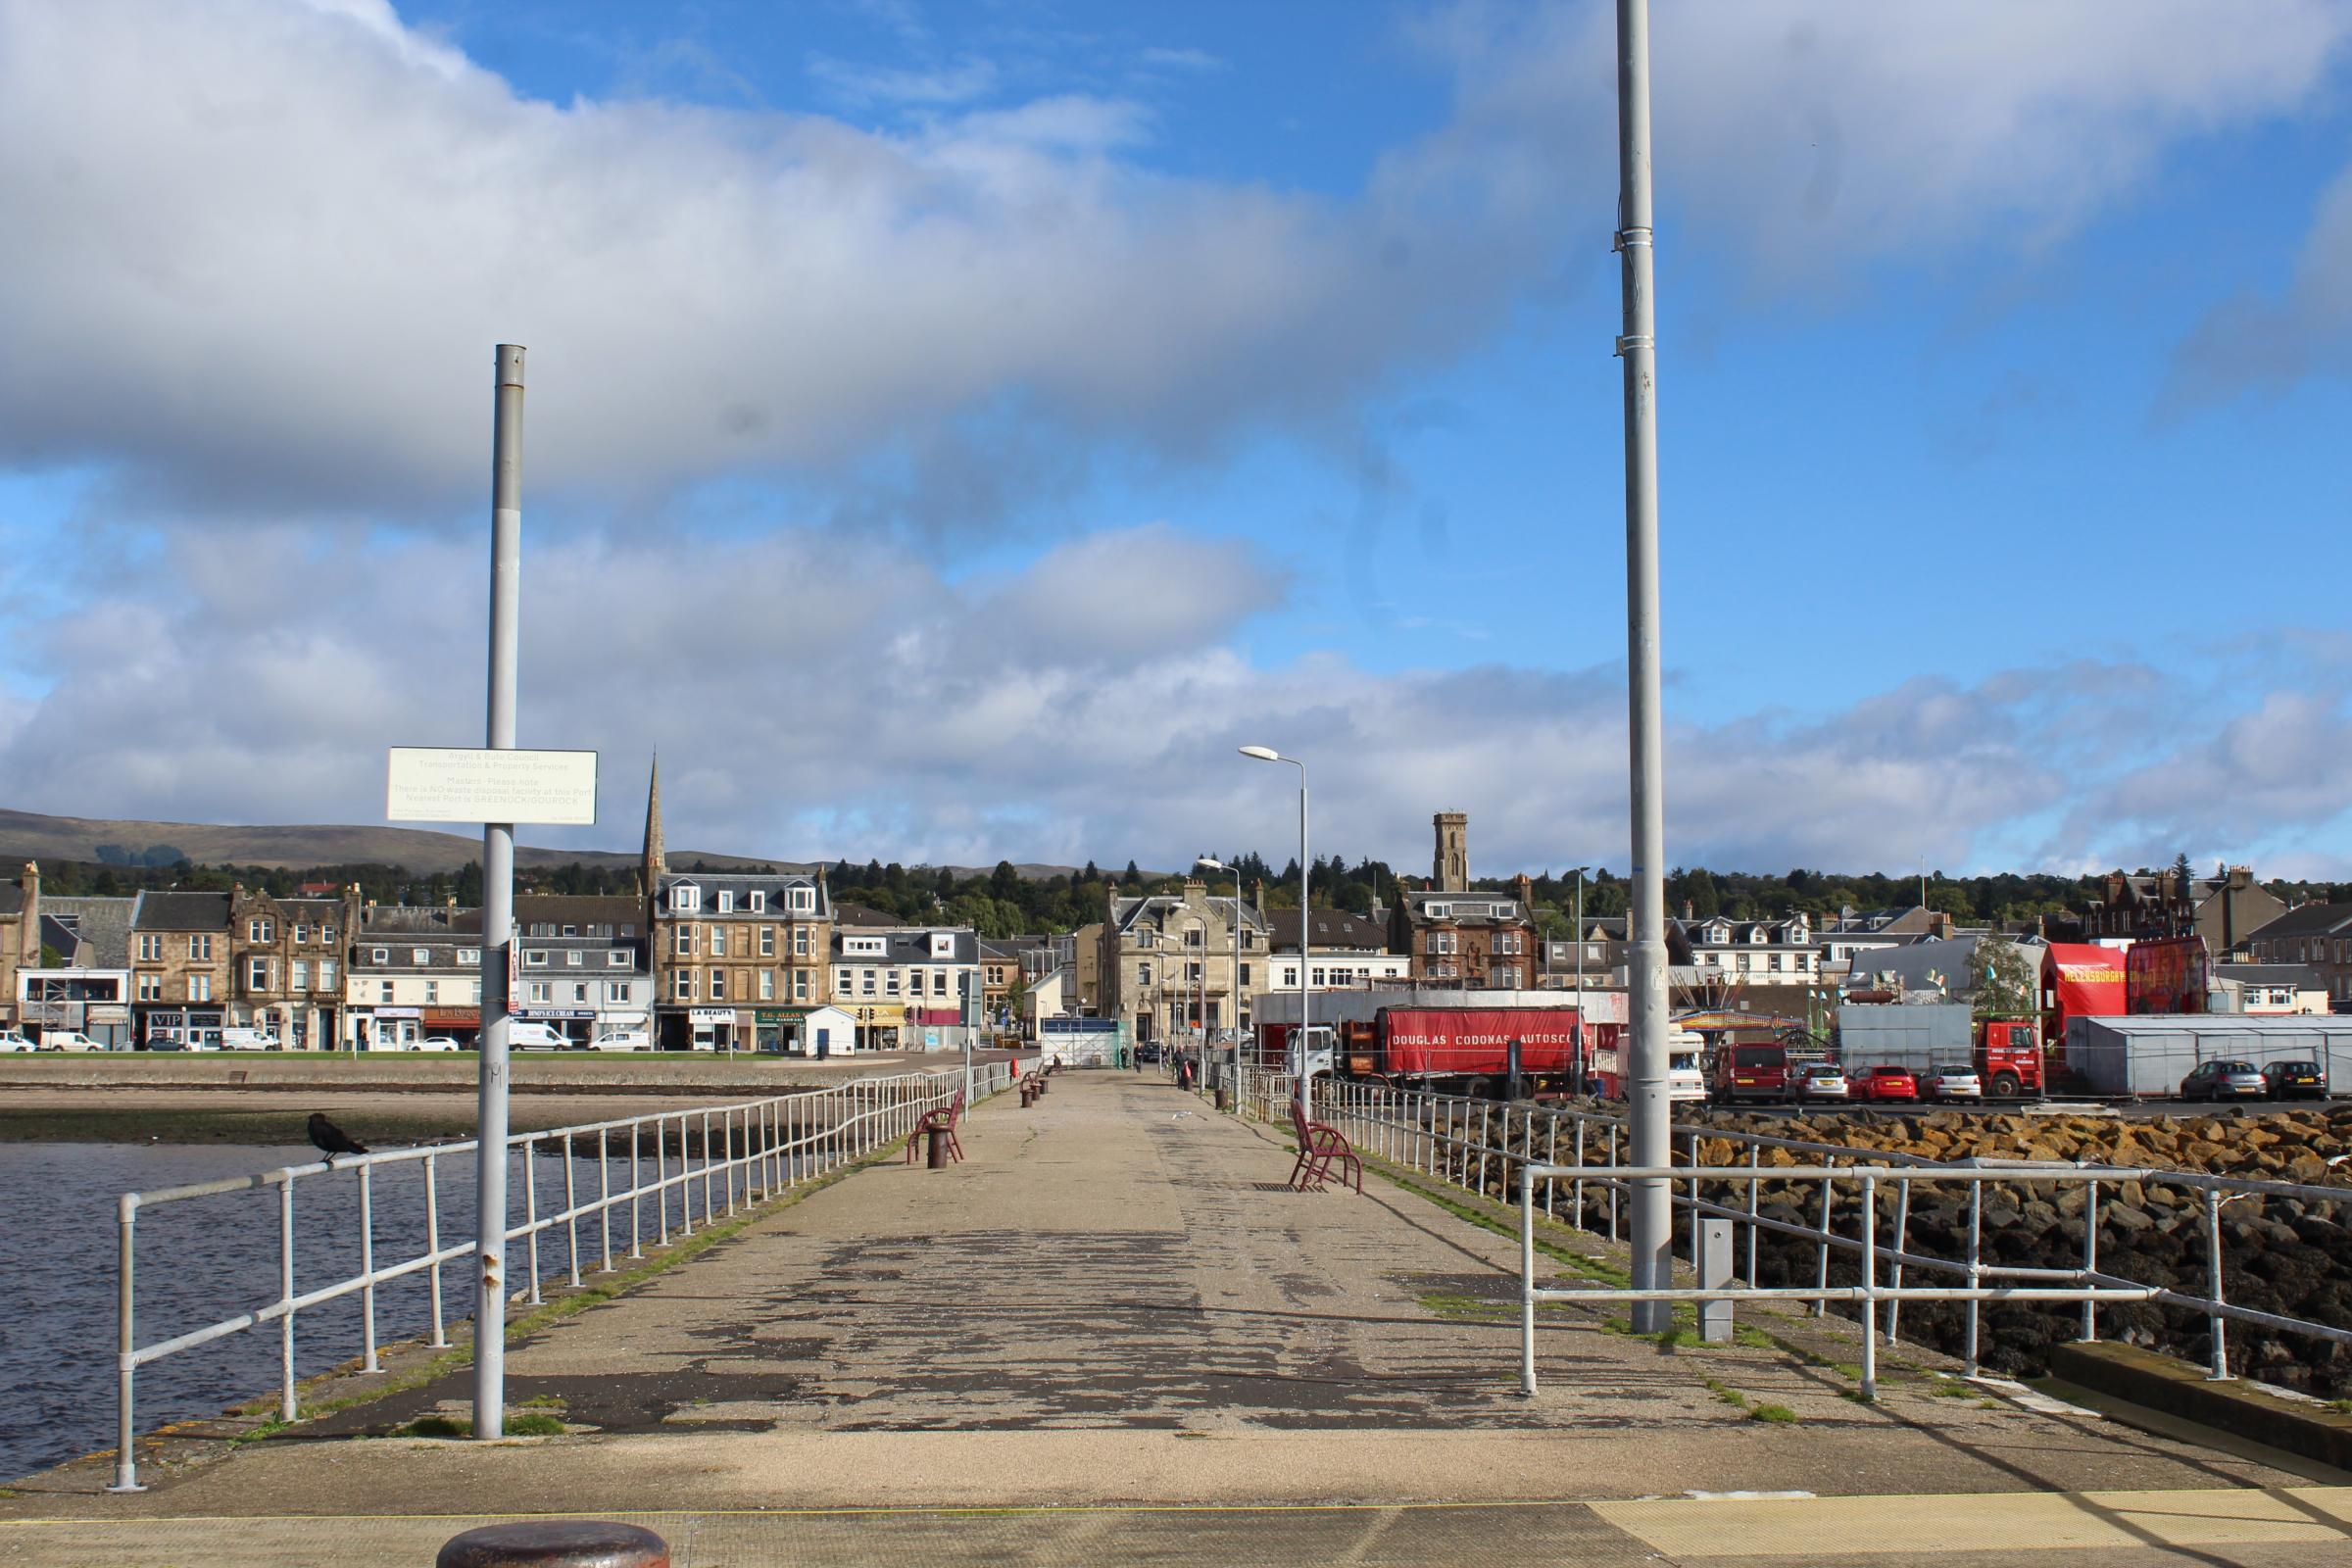 Helensburghs pier has been closed to marine traffic since 2018